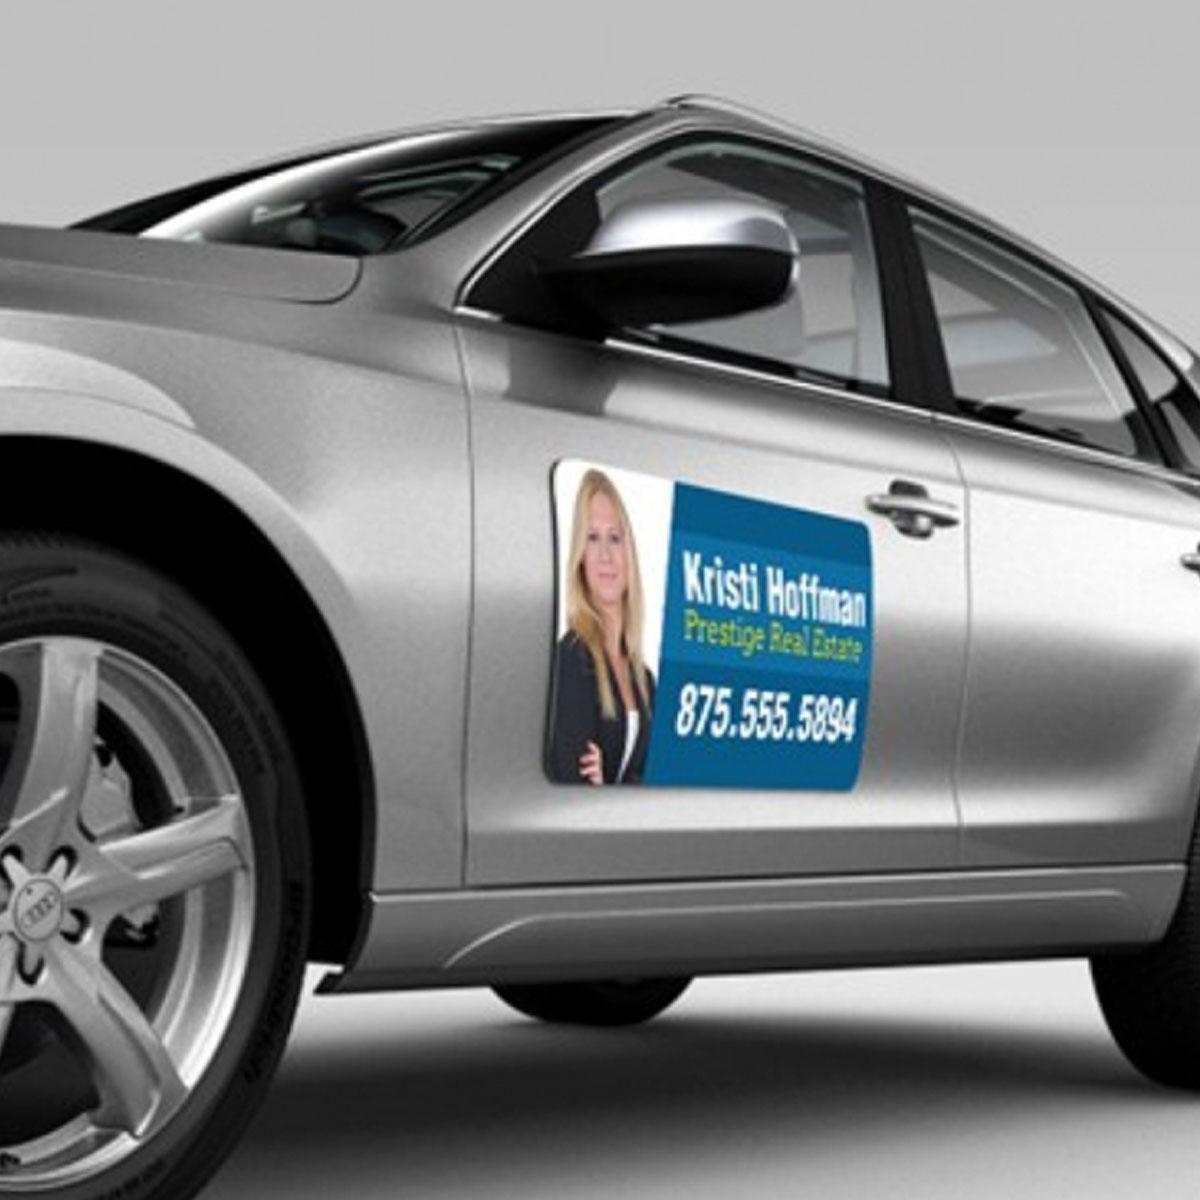 Increase Local Brand Awareness With Custom Vehicle Magnets & Marketing Flags